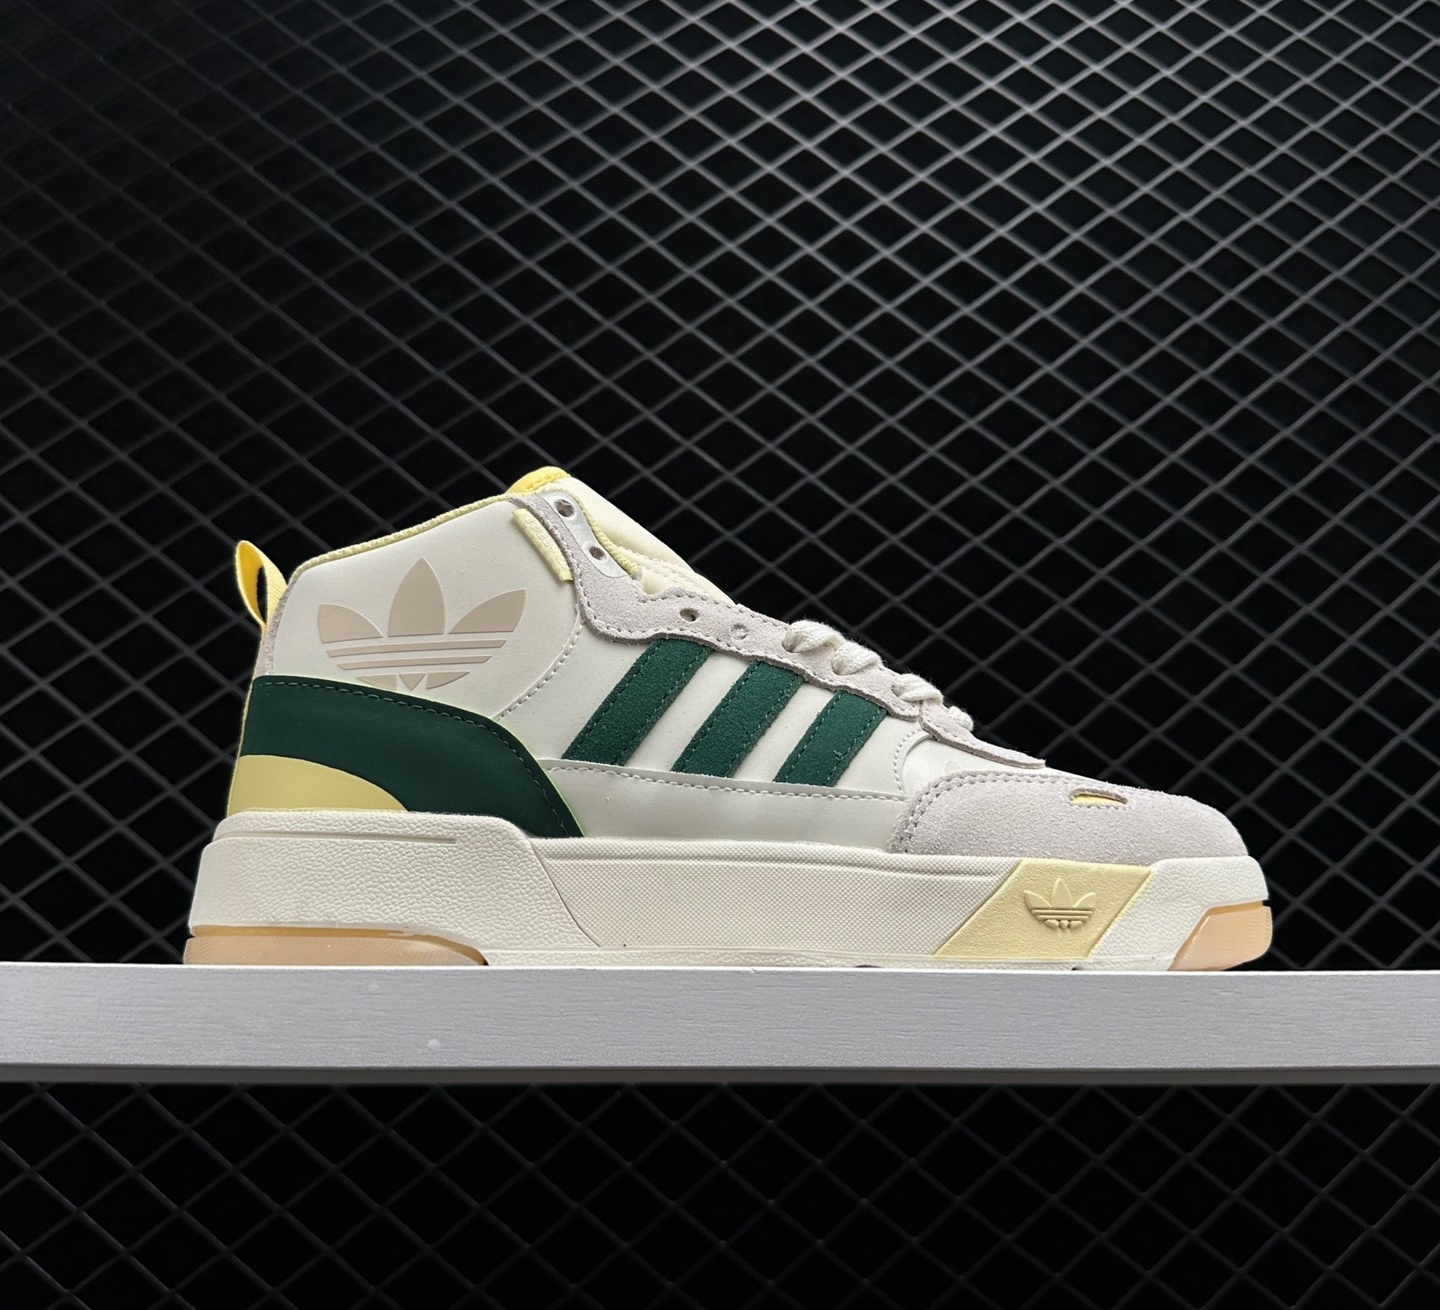 Adidas Originals Post Up WHITE GREEN YELLOW GV9318 - Stylish and Trendy Sneakers